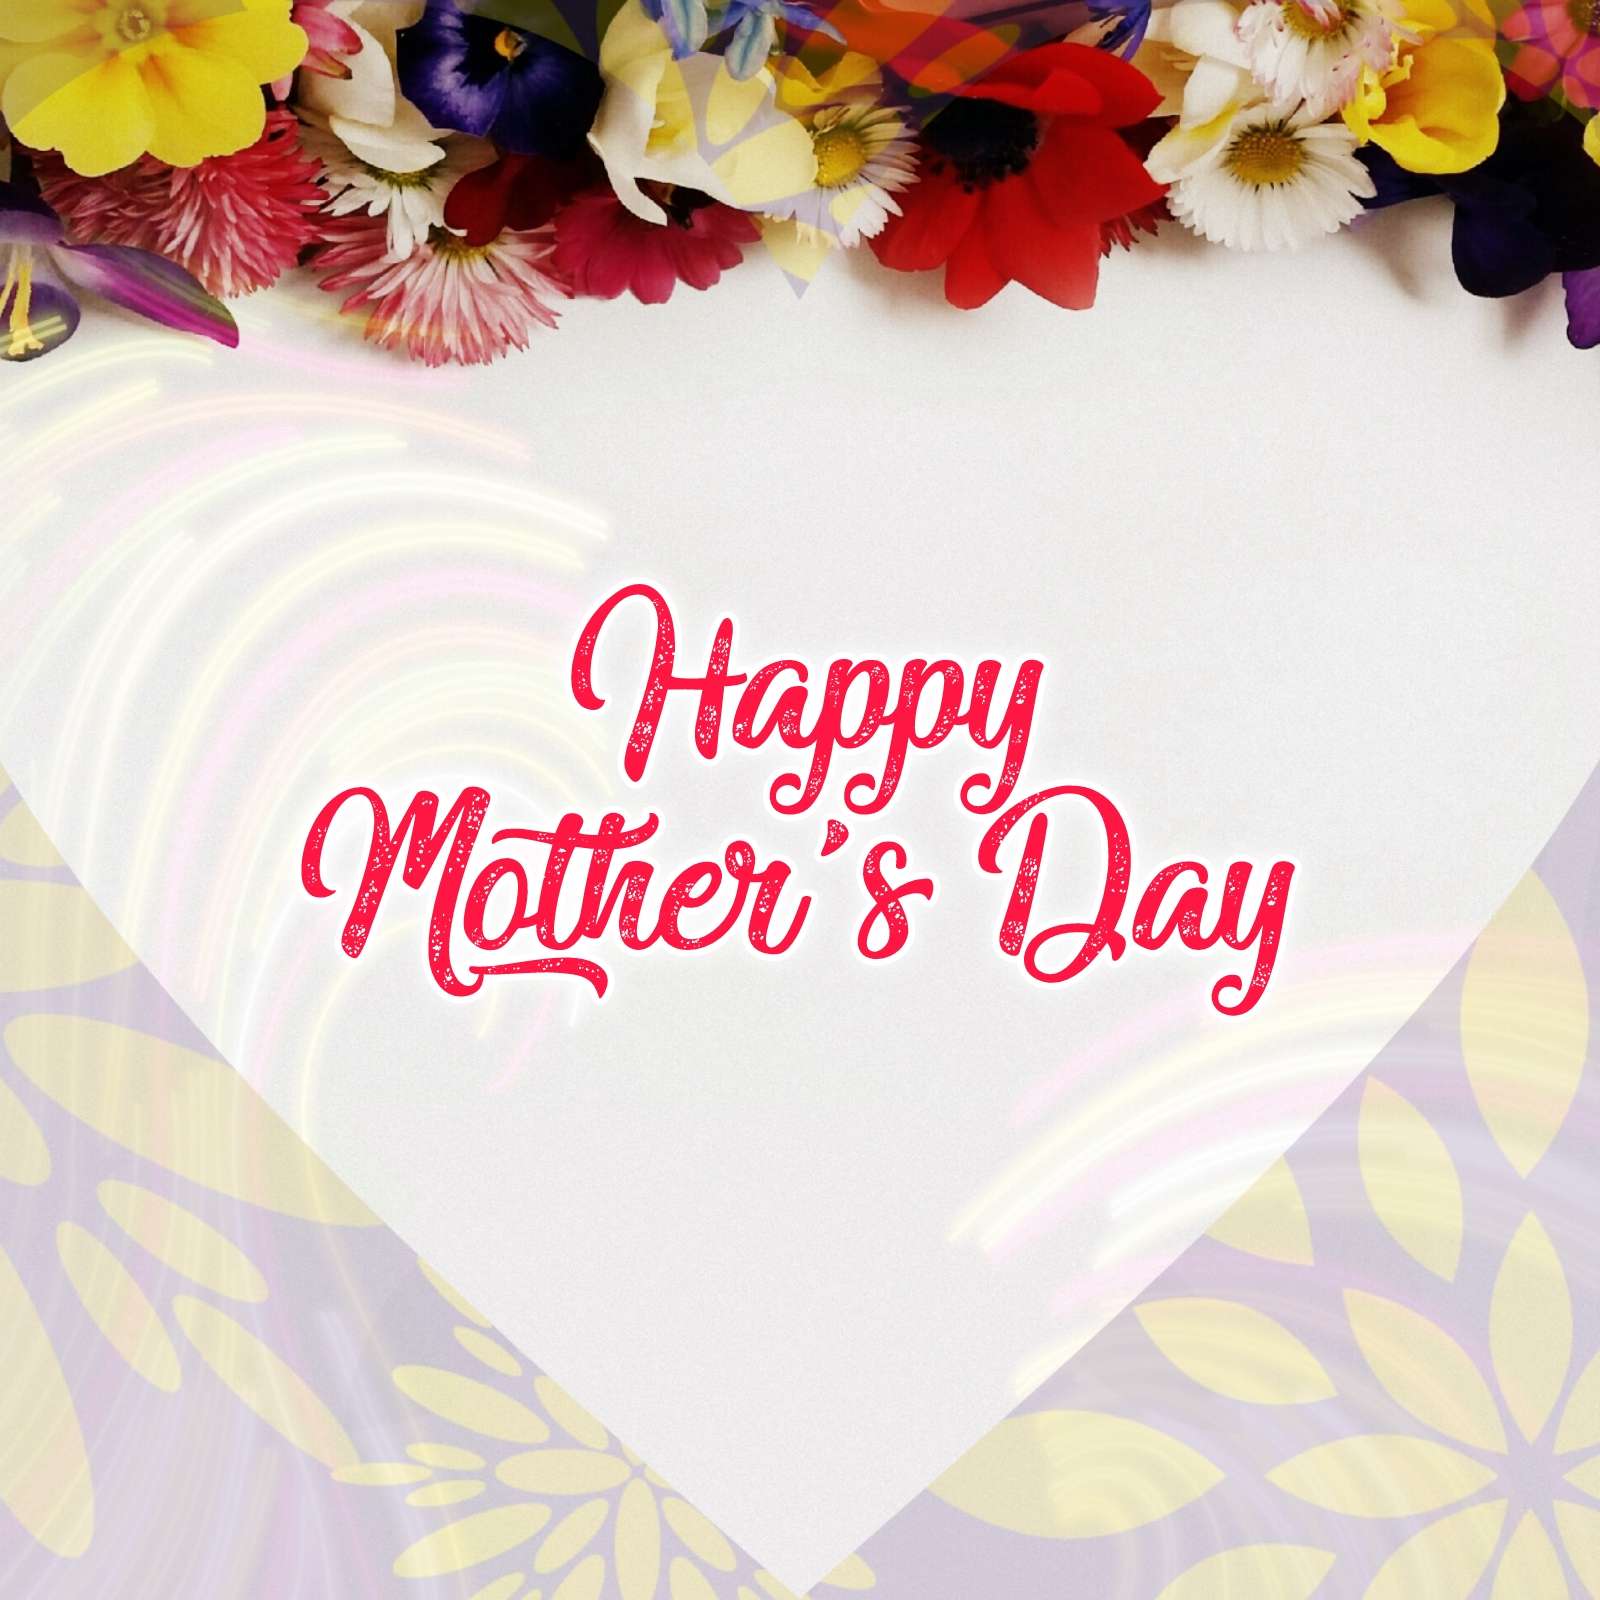 Abstract Beautiful Happy Mothers Day Wallpaper Background Wallpaper Image  For Free Download - Pngtree